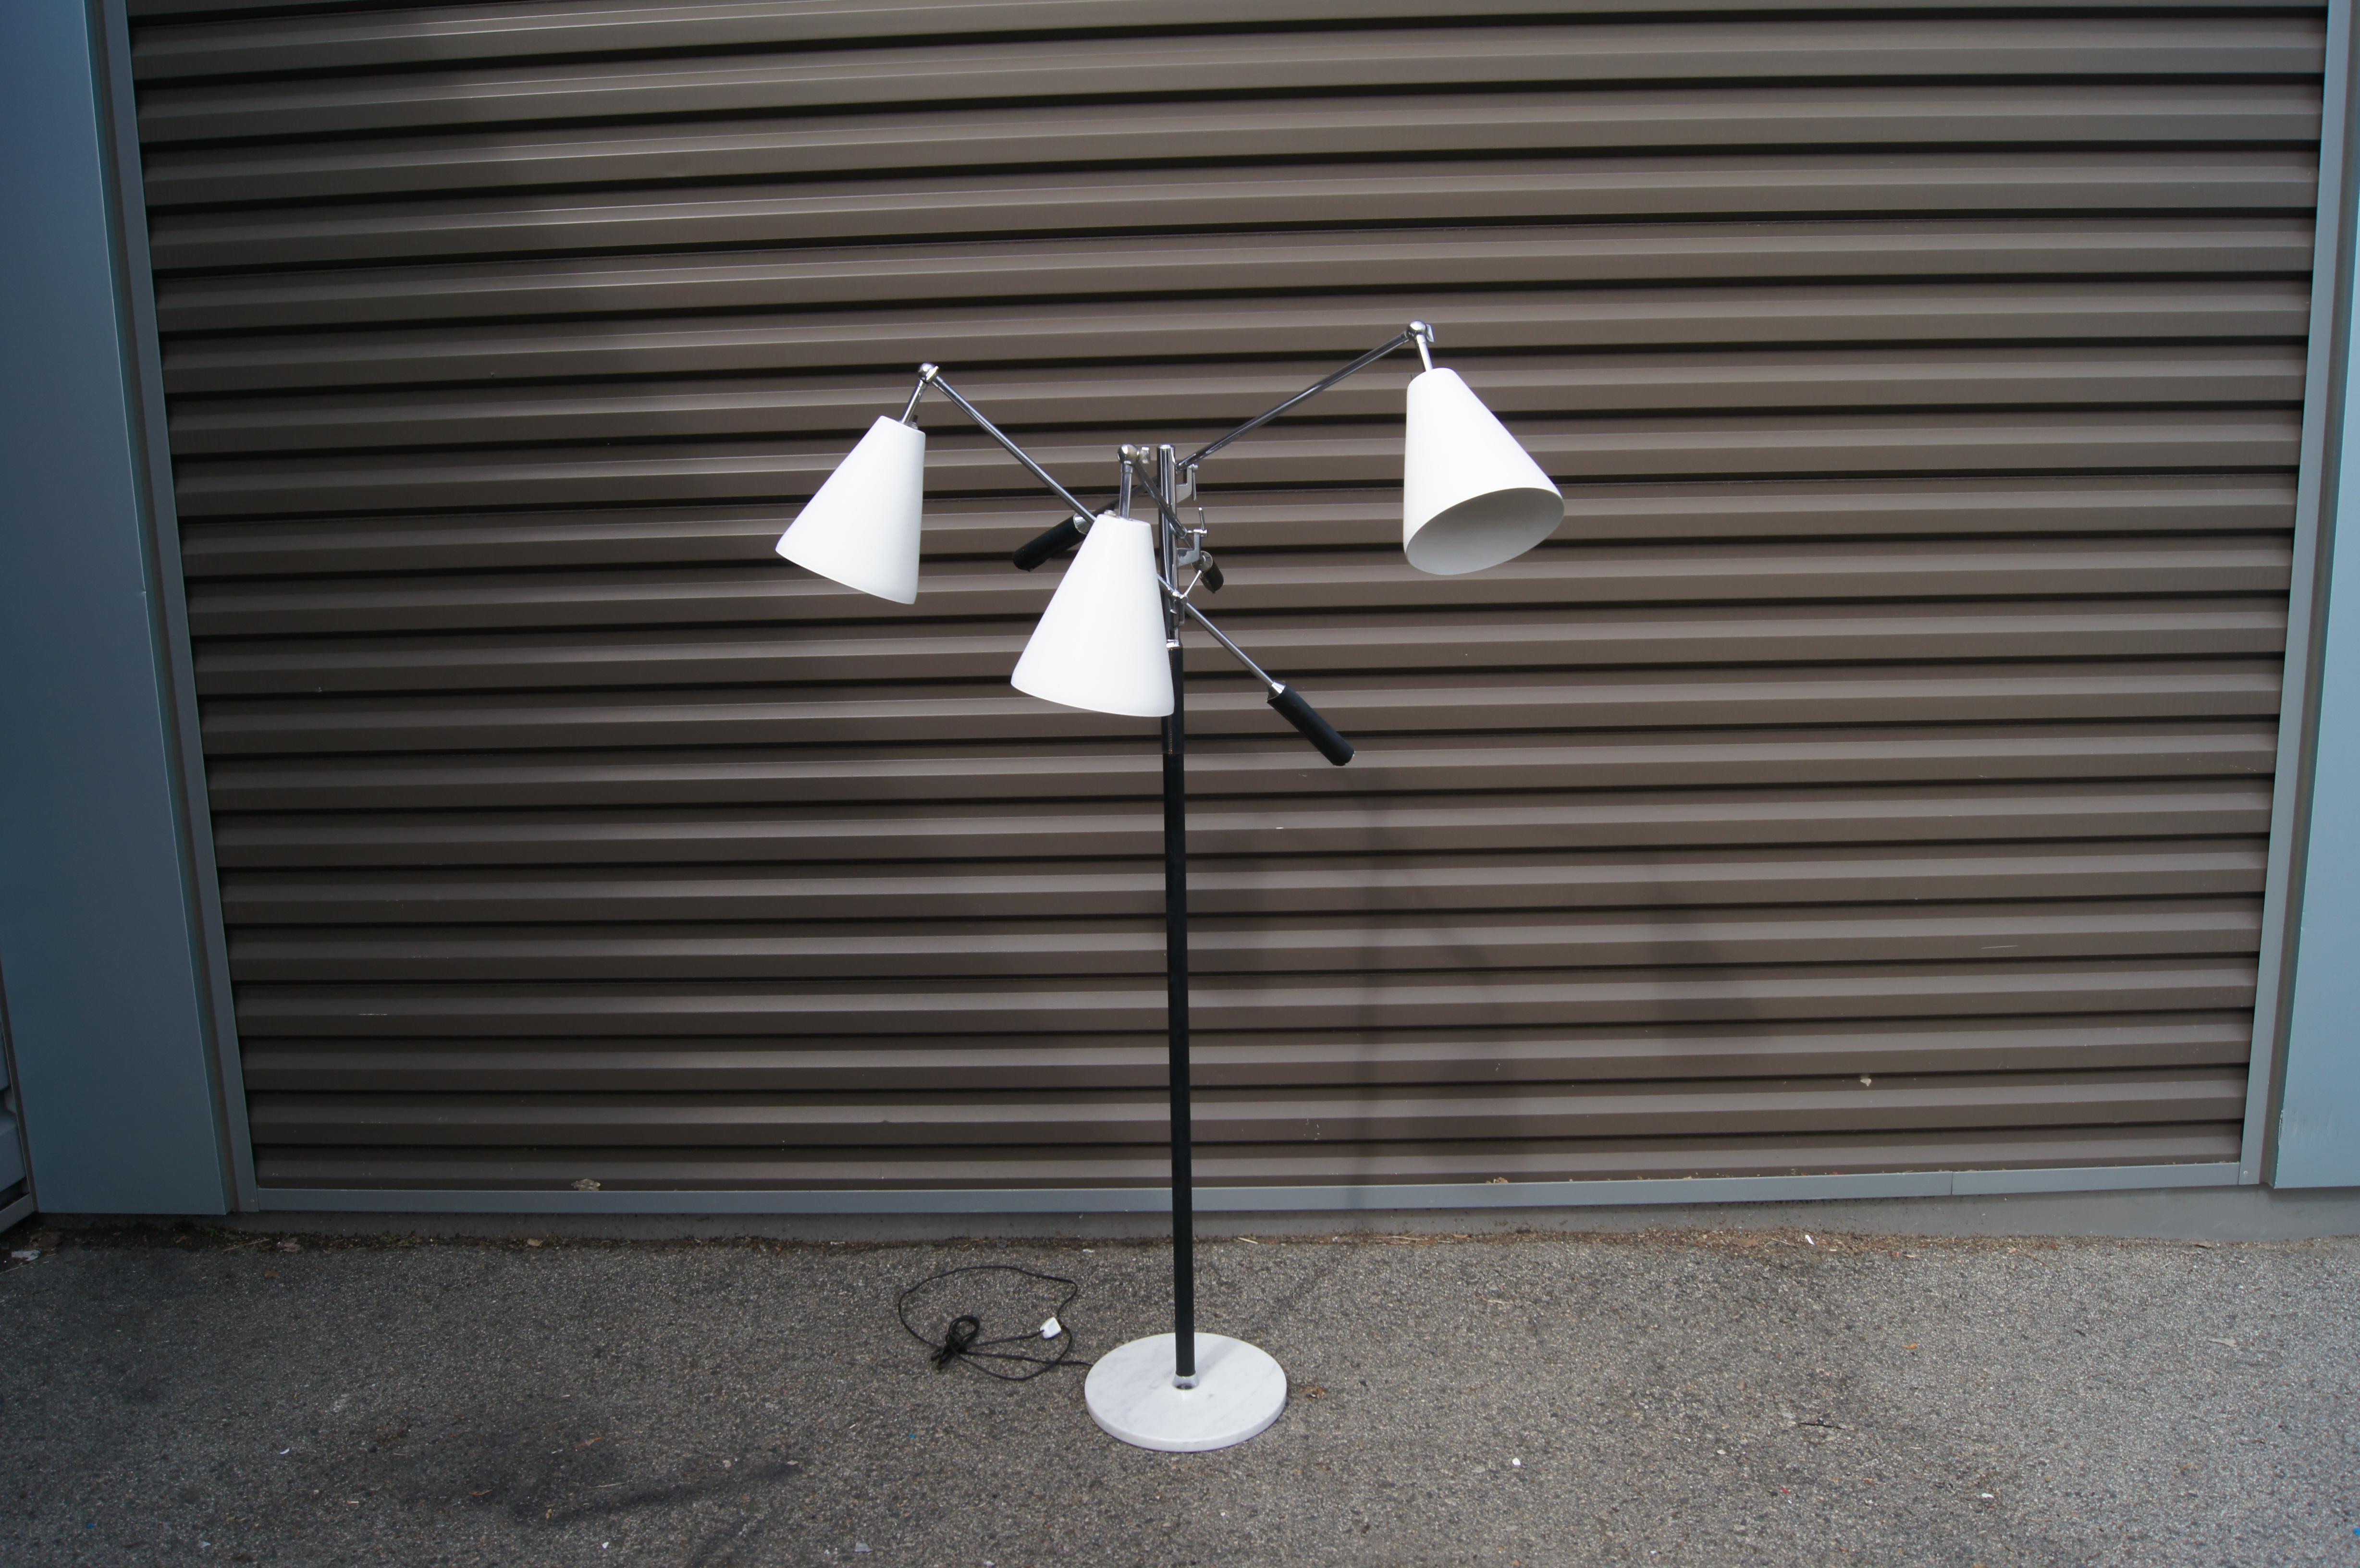 This 1960s triennale floor lamp in the style of Arredoluce was manufactured in Italy for the American lighting company Koch & Lowy. A black-enameled chrome post rises from a round marble base. Three chrome arms with stitched leather sleeves end in